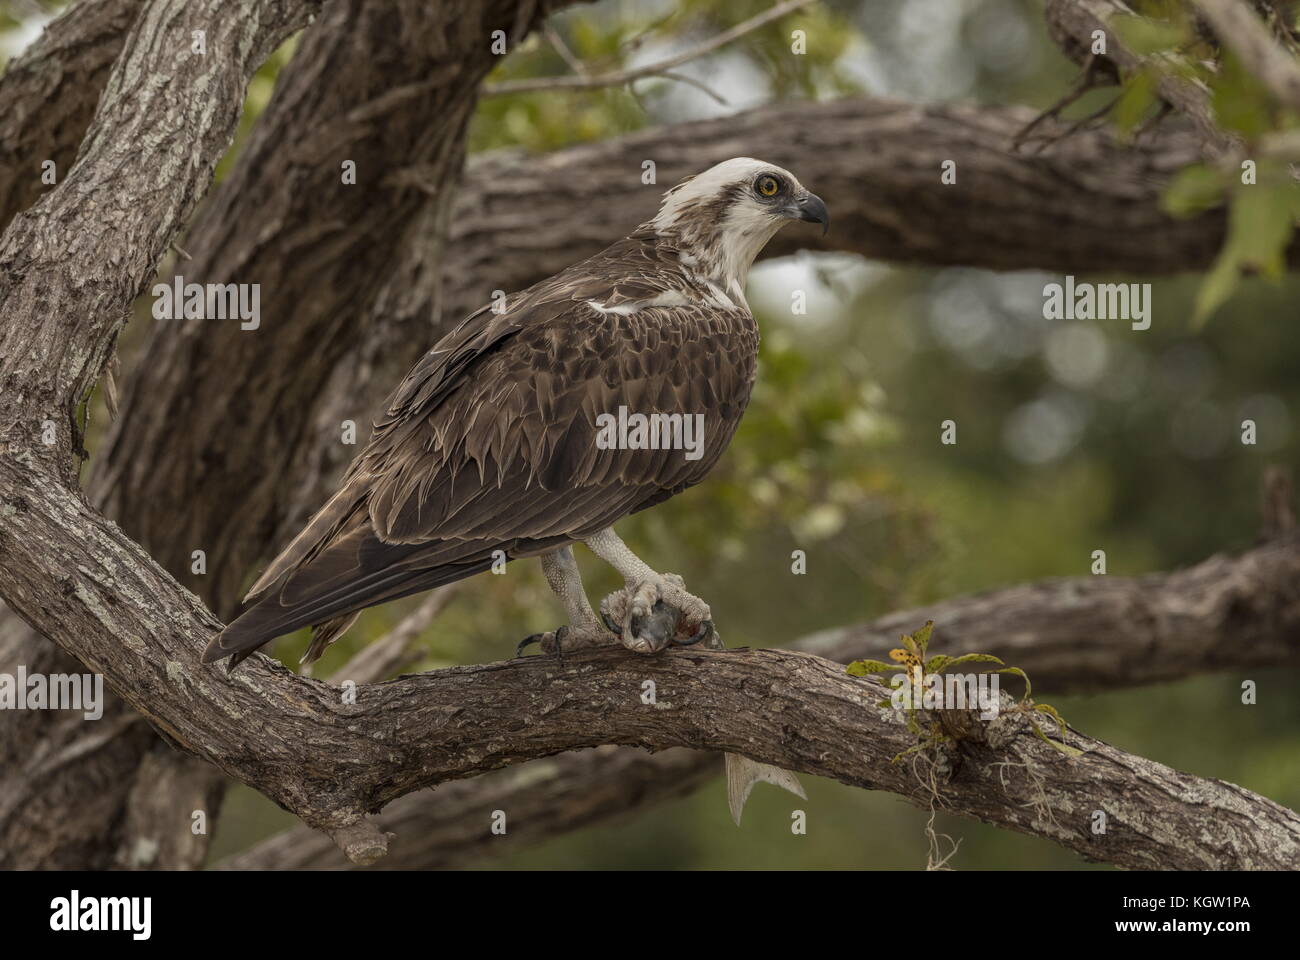 Osprey, Pandion haliaetus, perched in tree with fish prey. Florida. Stock Photo